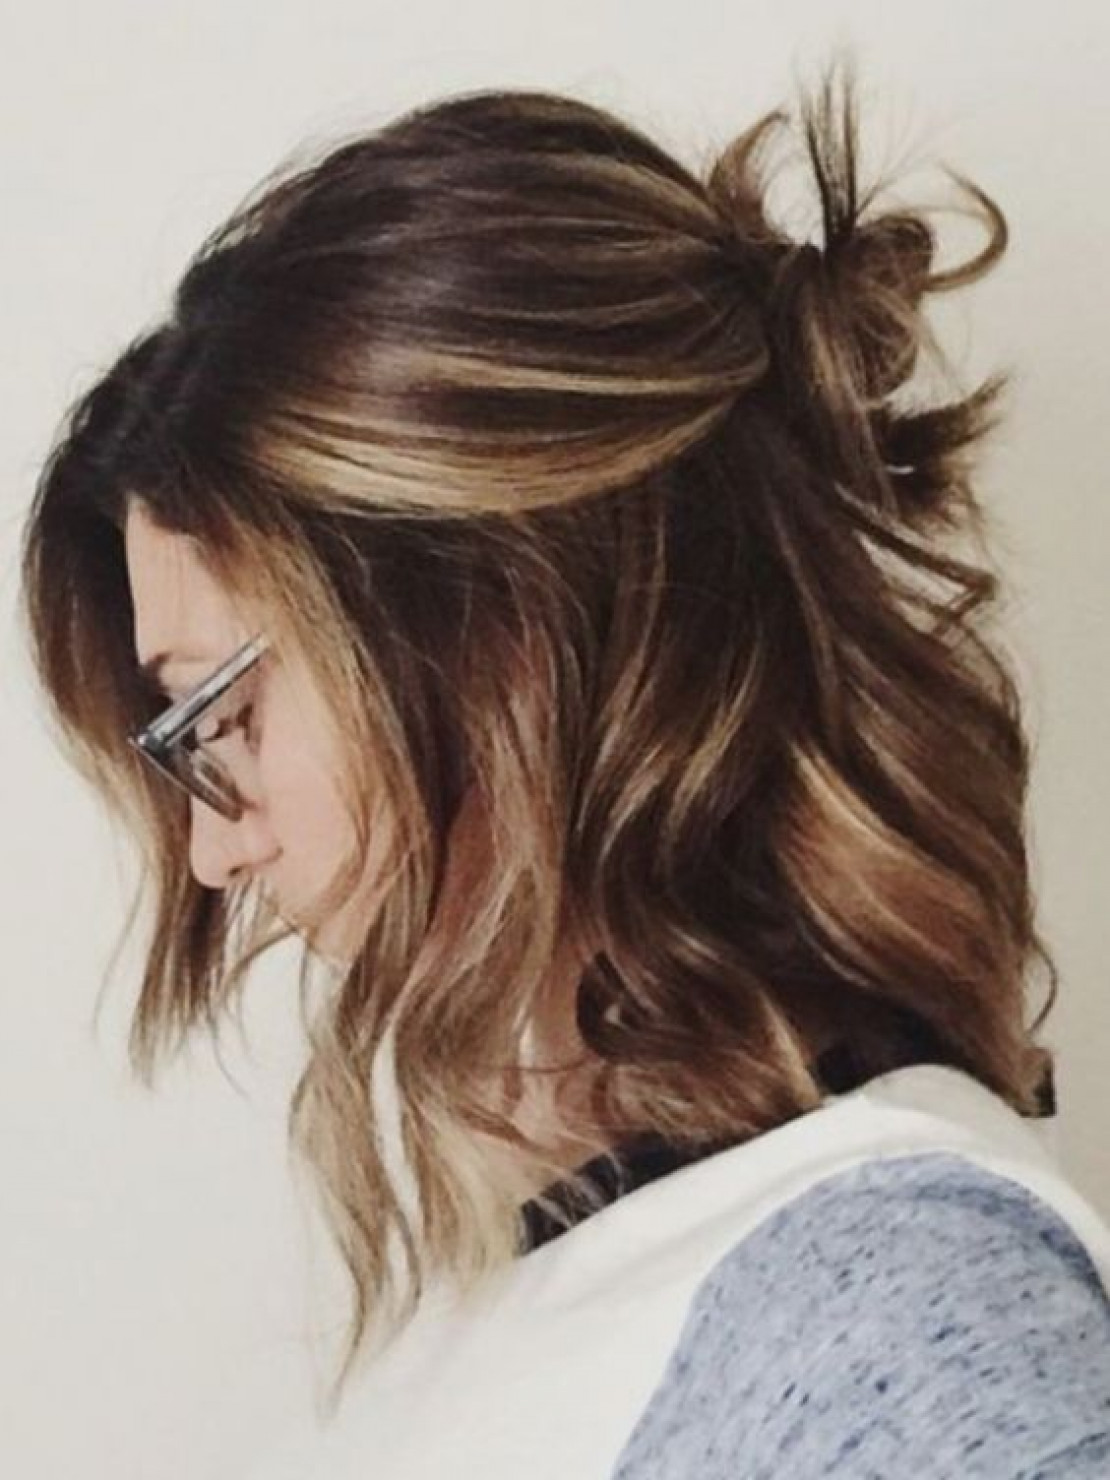 20 Simple and Easy Hairstyles for Your Daily Look